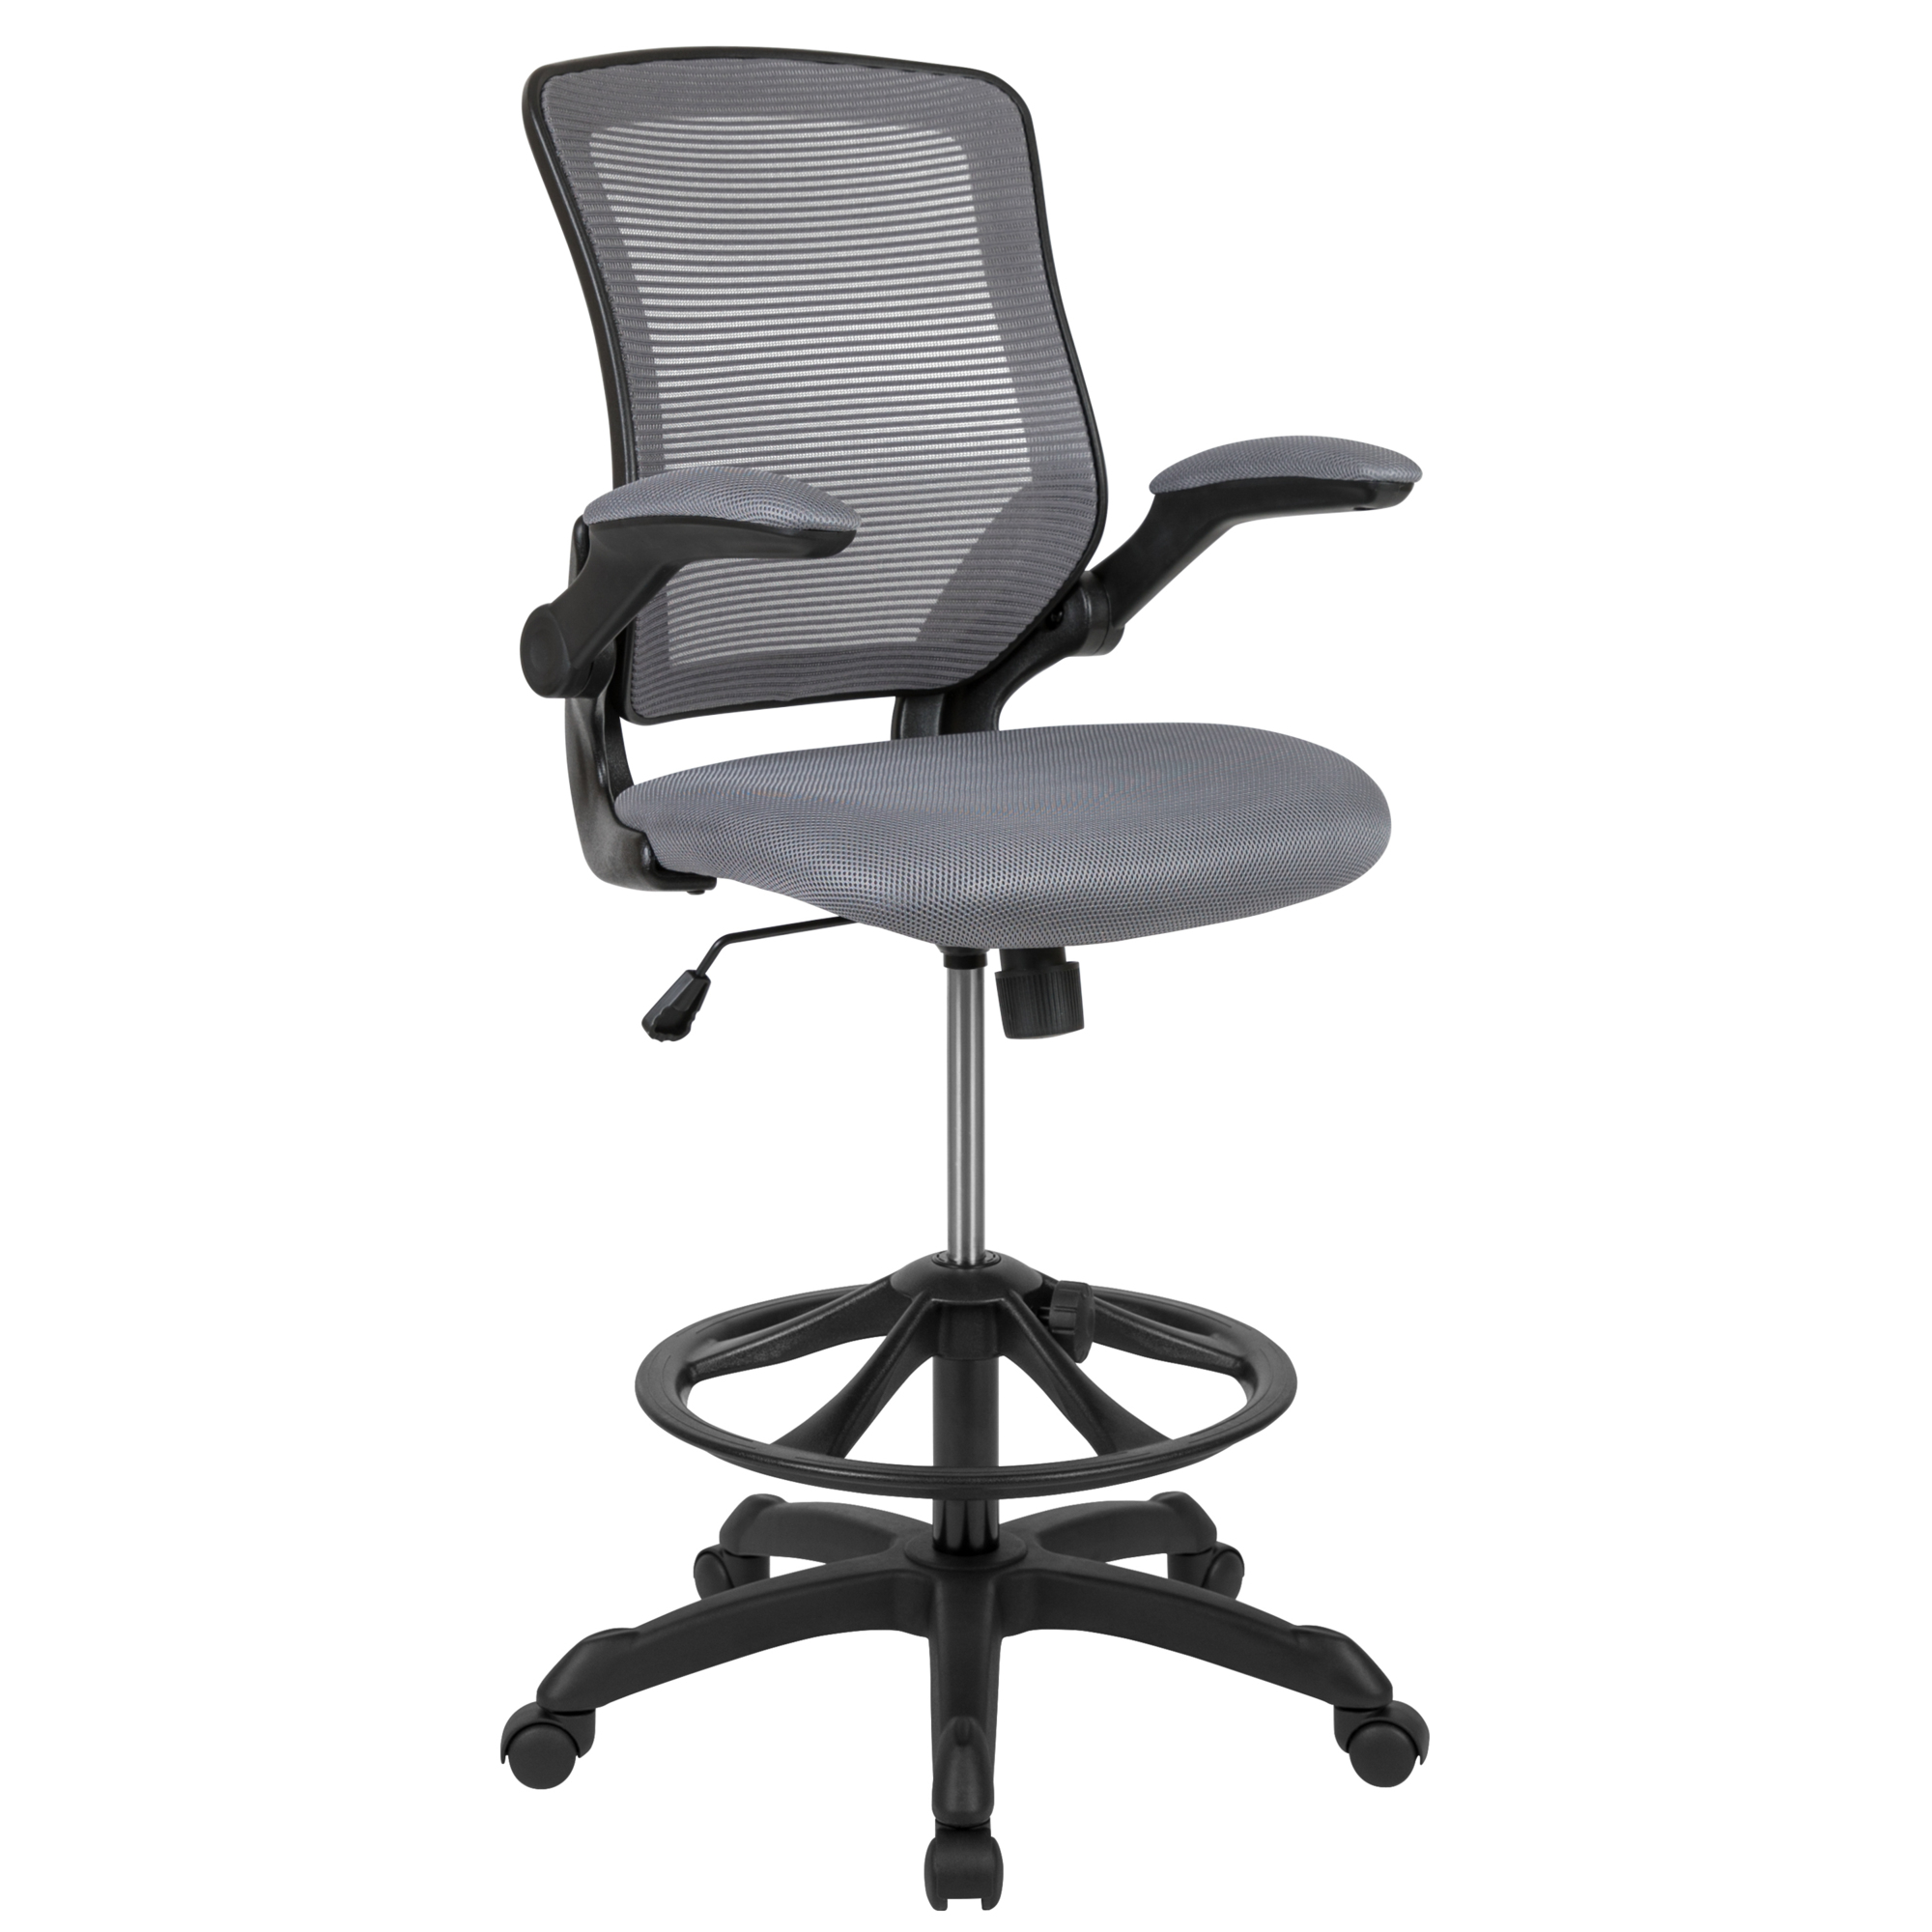 Flash Furniture, Mid-Back Dark Gray Mesh Ergonomic Drafting Chair, Primary Color Gray, Included (qty.) 1 Model BLZP8805DDKGY